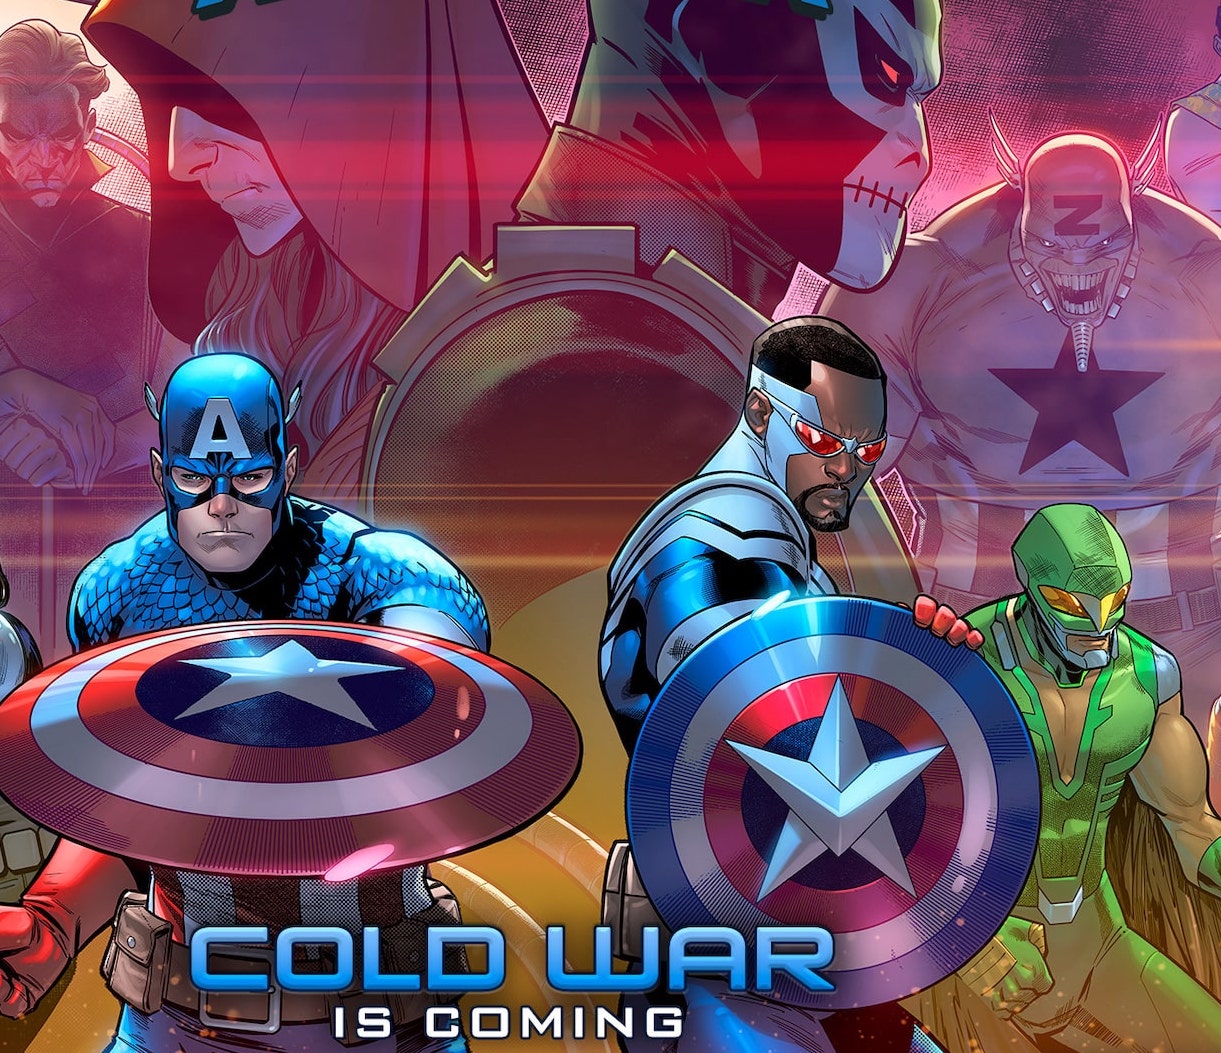 Marvel teases 'Cold War is Coming' for 'Captain America' in October 2022